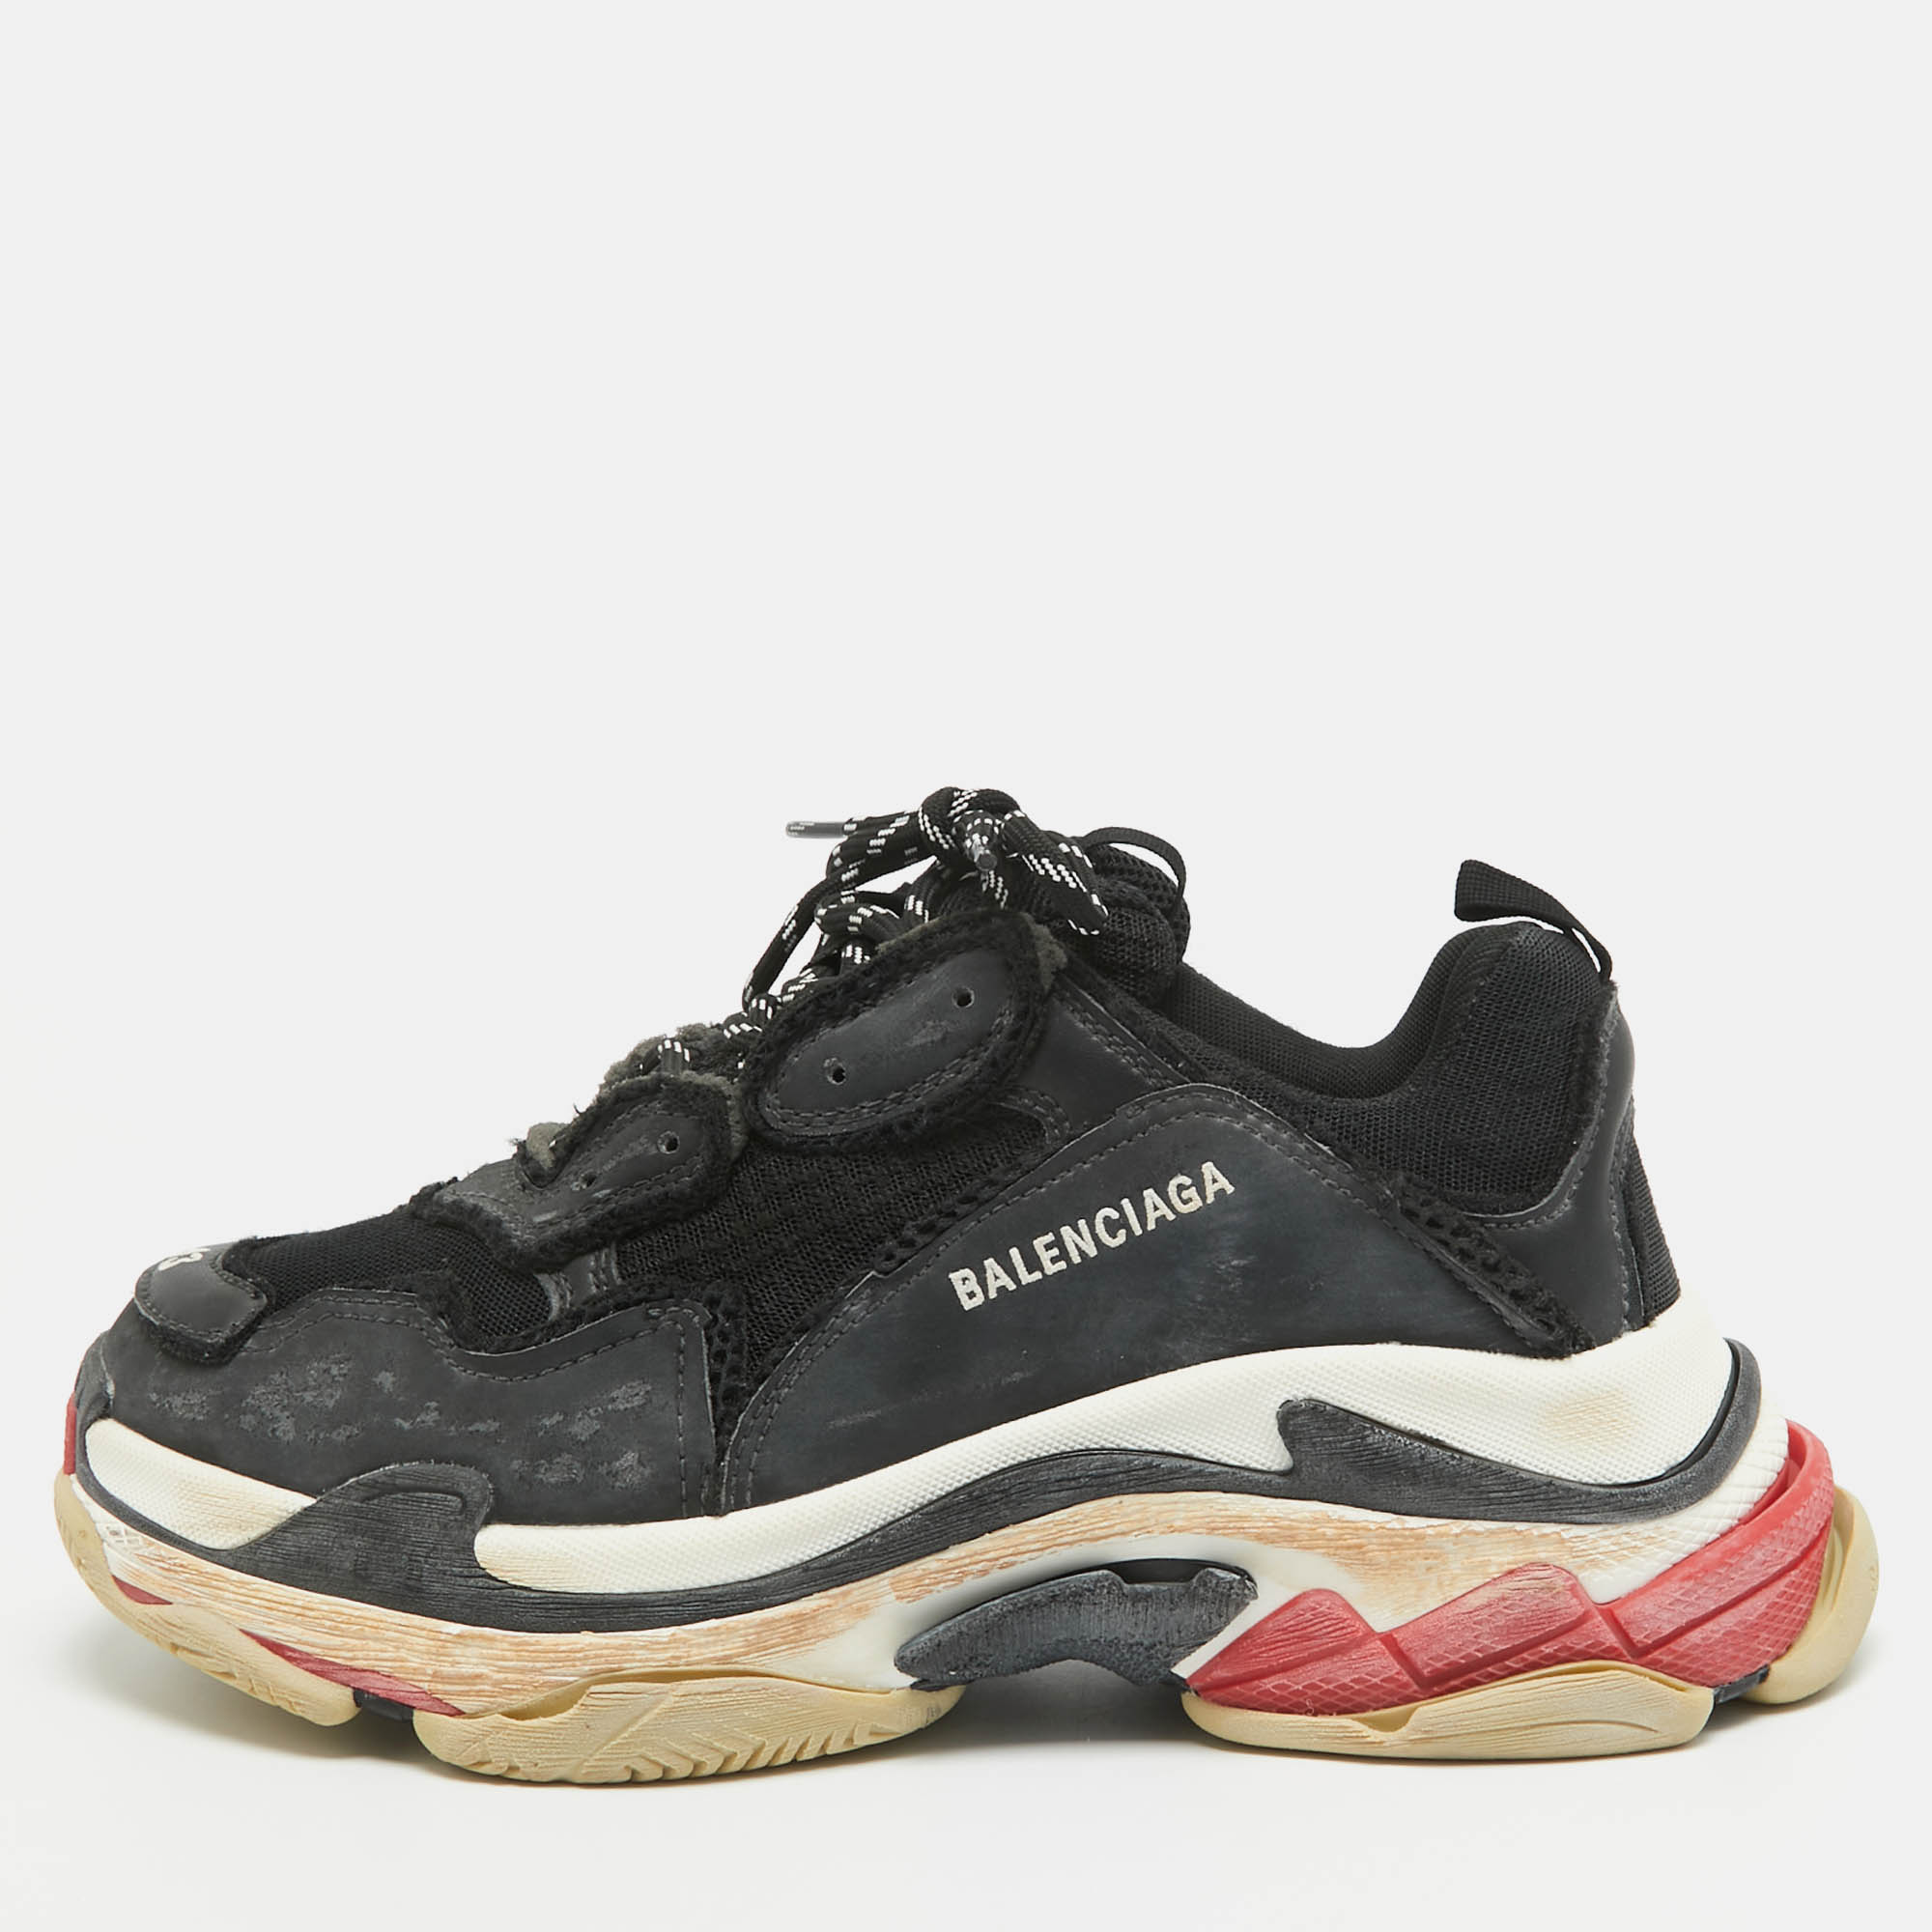 

Balenciaga Black Faux Leather and Mesh Distressed Triple S Sneakers Size